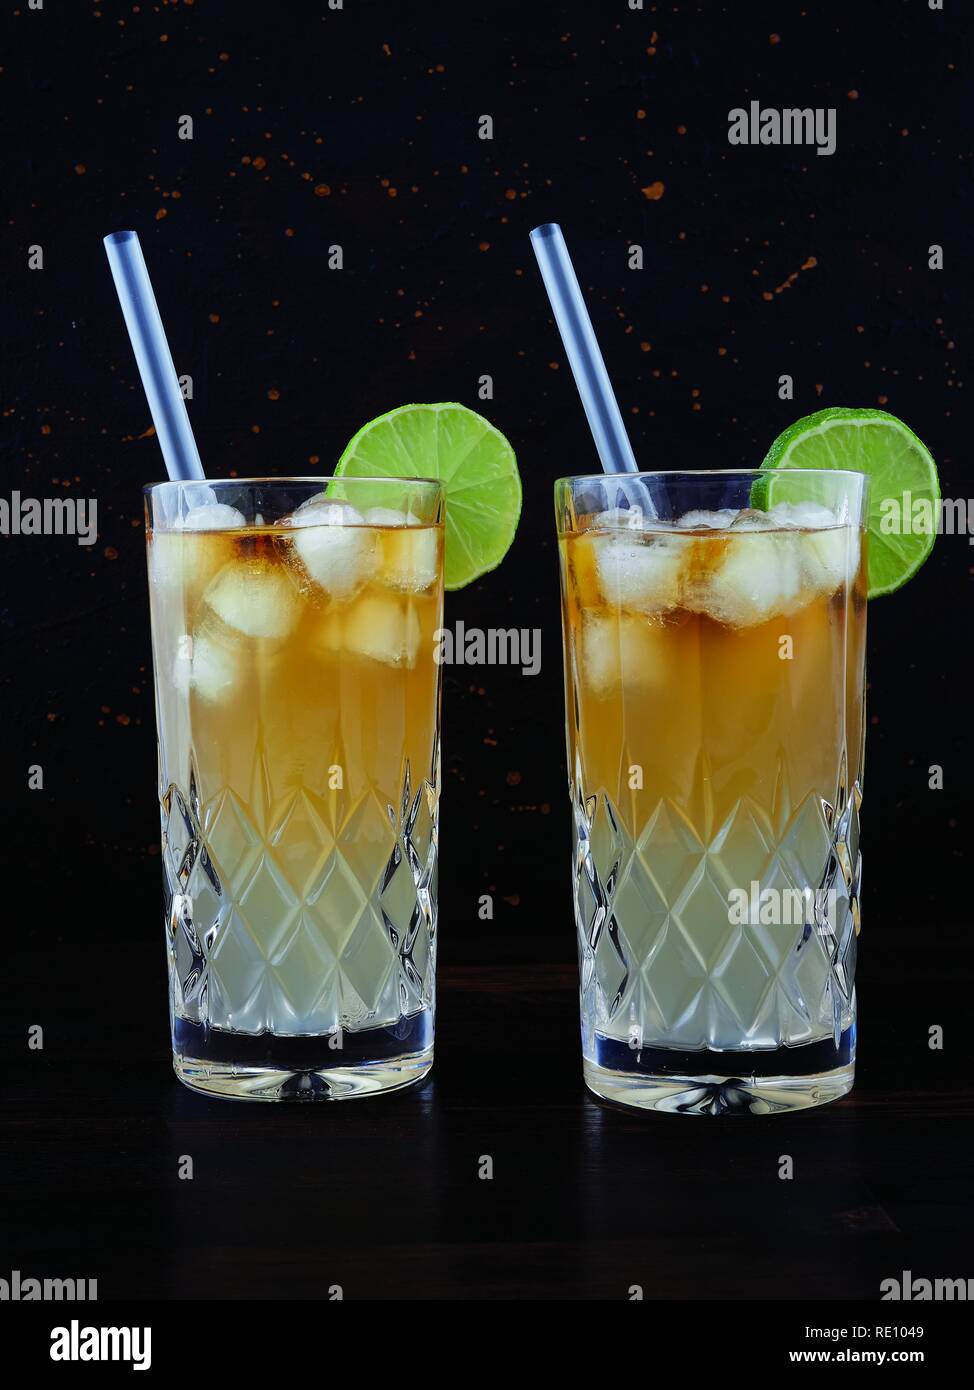 Dark 'n' stormy, a cocktail made using dark rum, ginger ale or beer, served in a highball glass filled with ice and garnished with a slice of lime Stock Photo